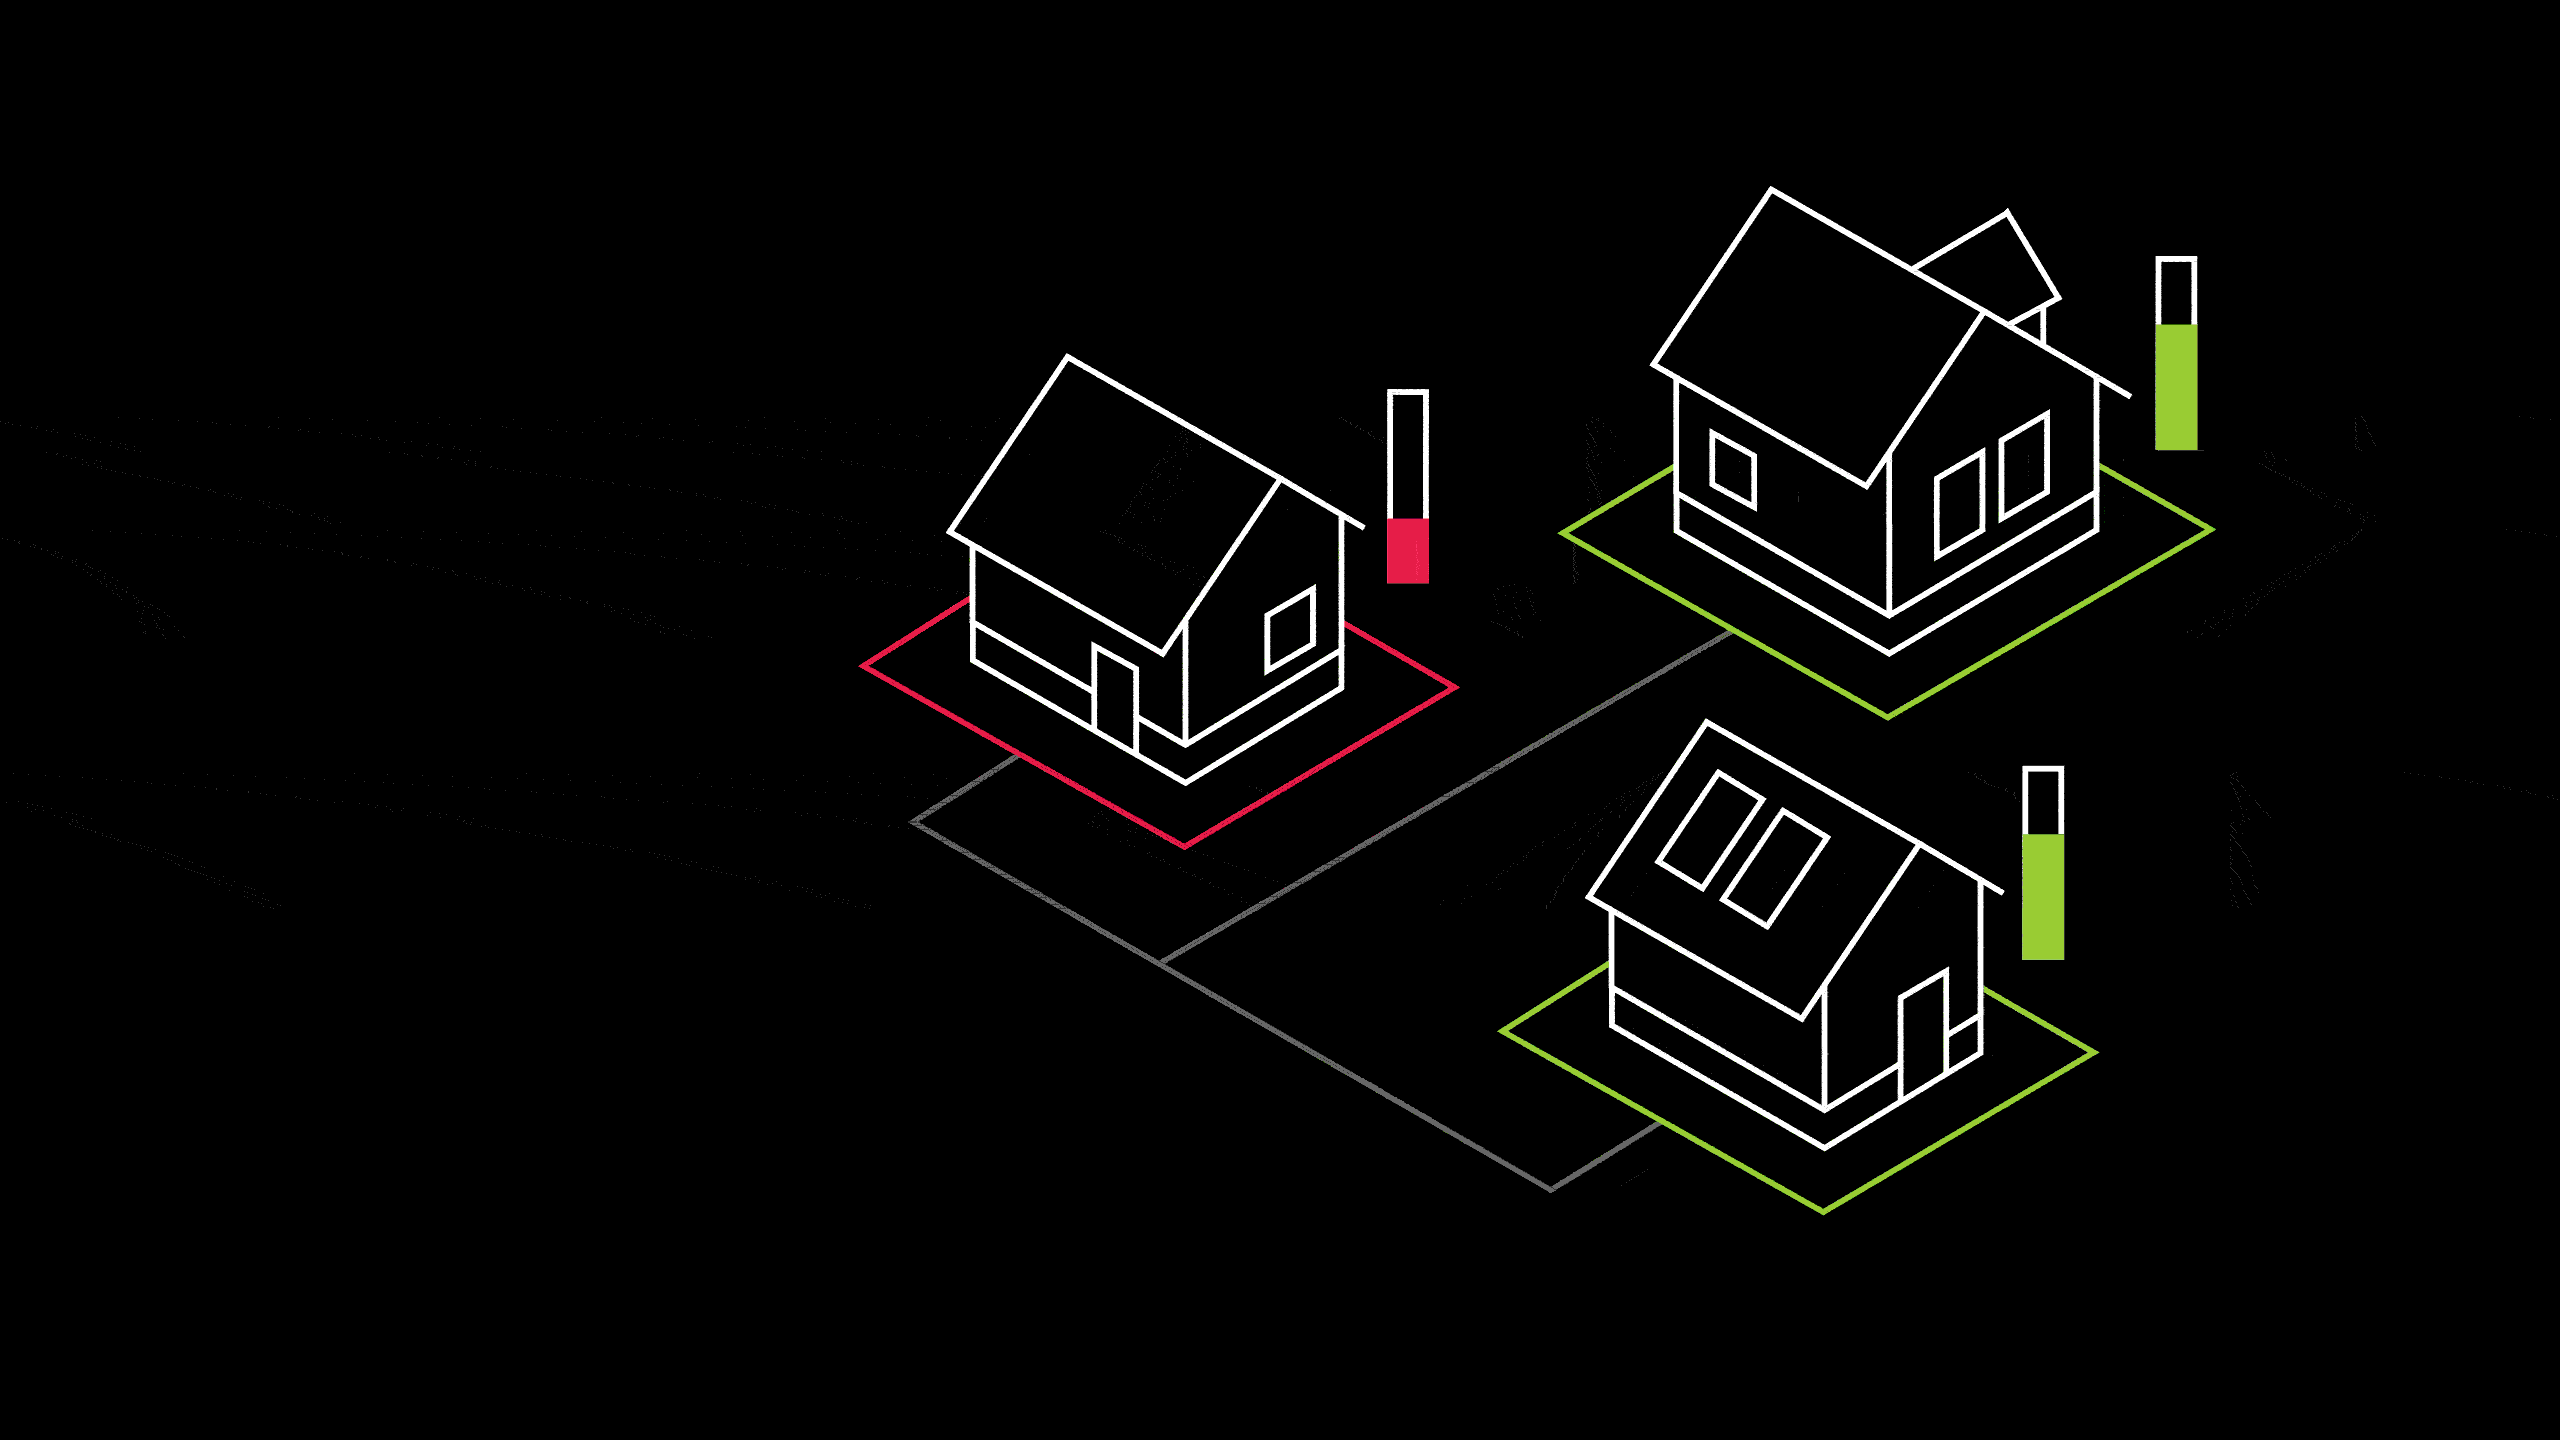 House 1 receiving electricity from nearby houses 2 and 3, through blockchain technology.